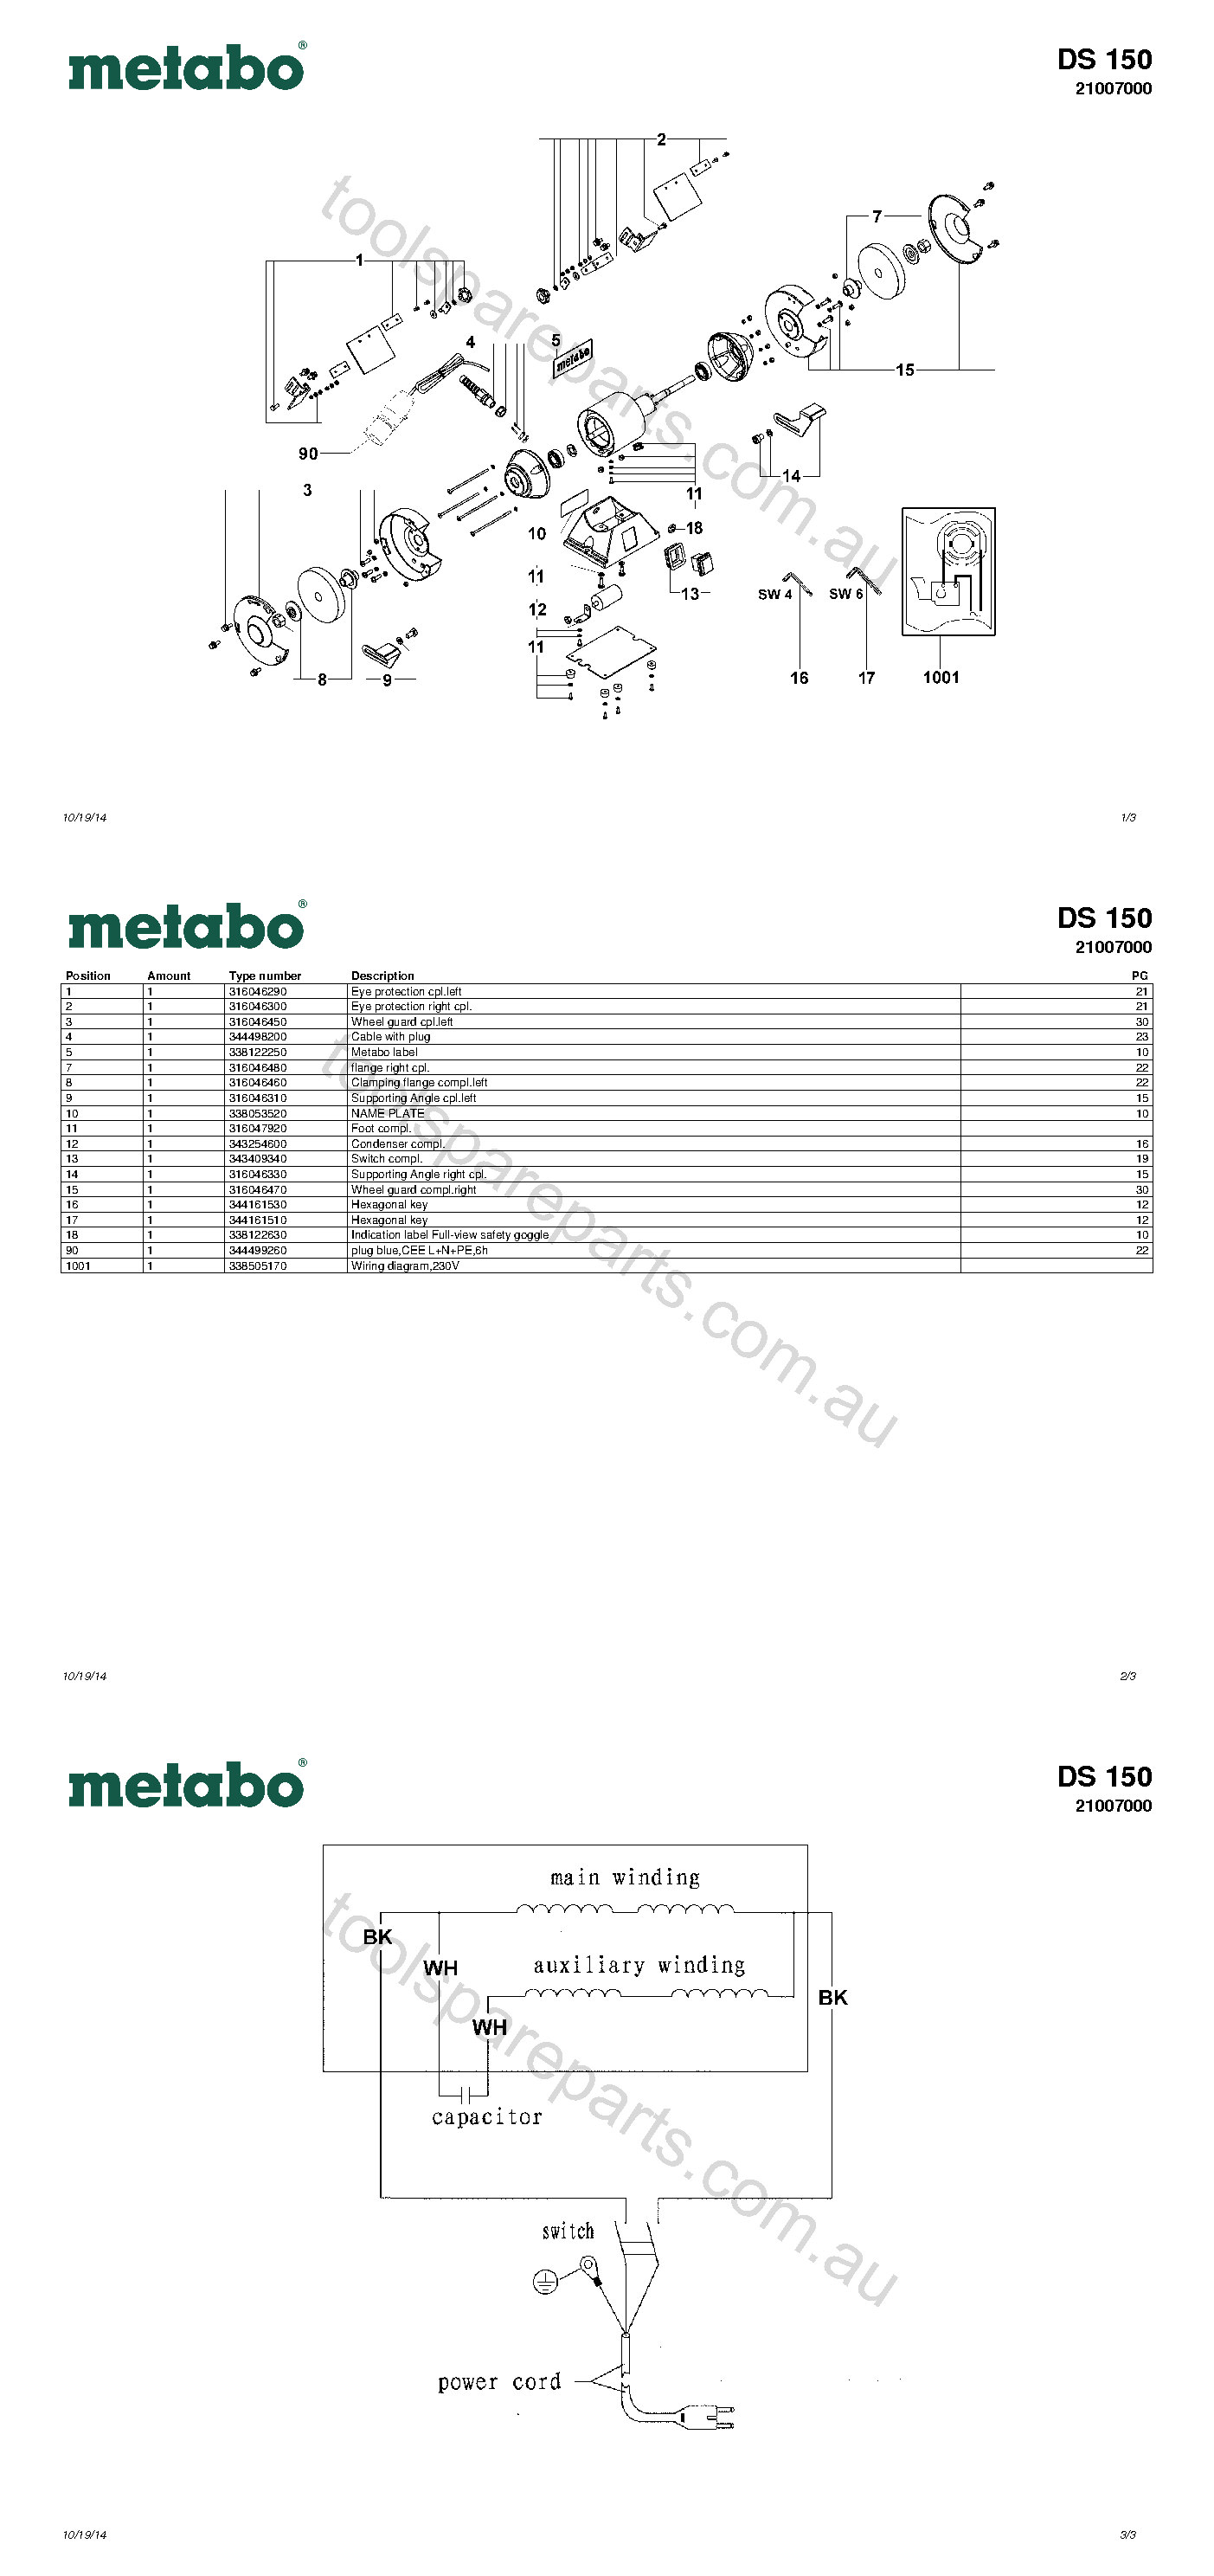 Metabo DS 150 21007000  Diagram 1